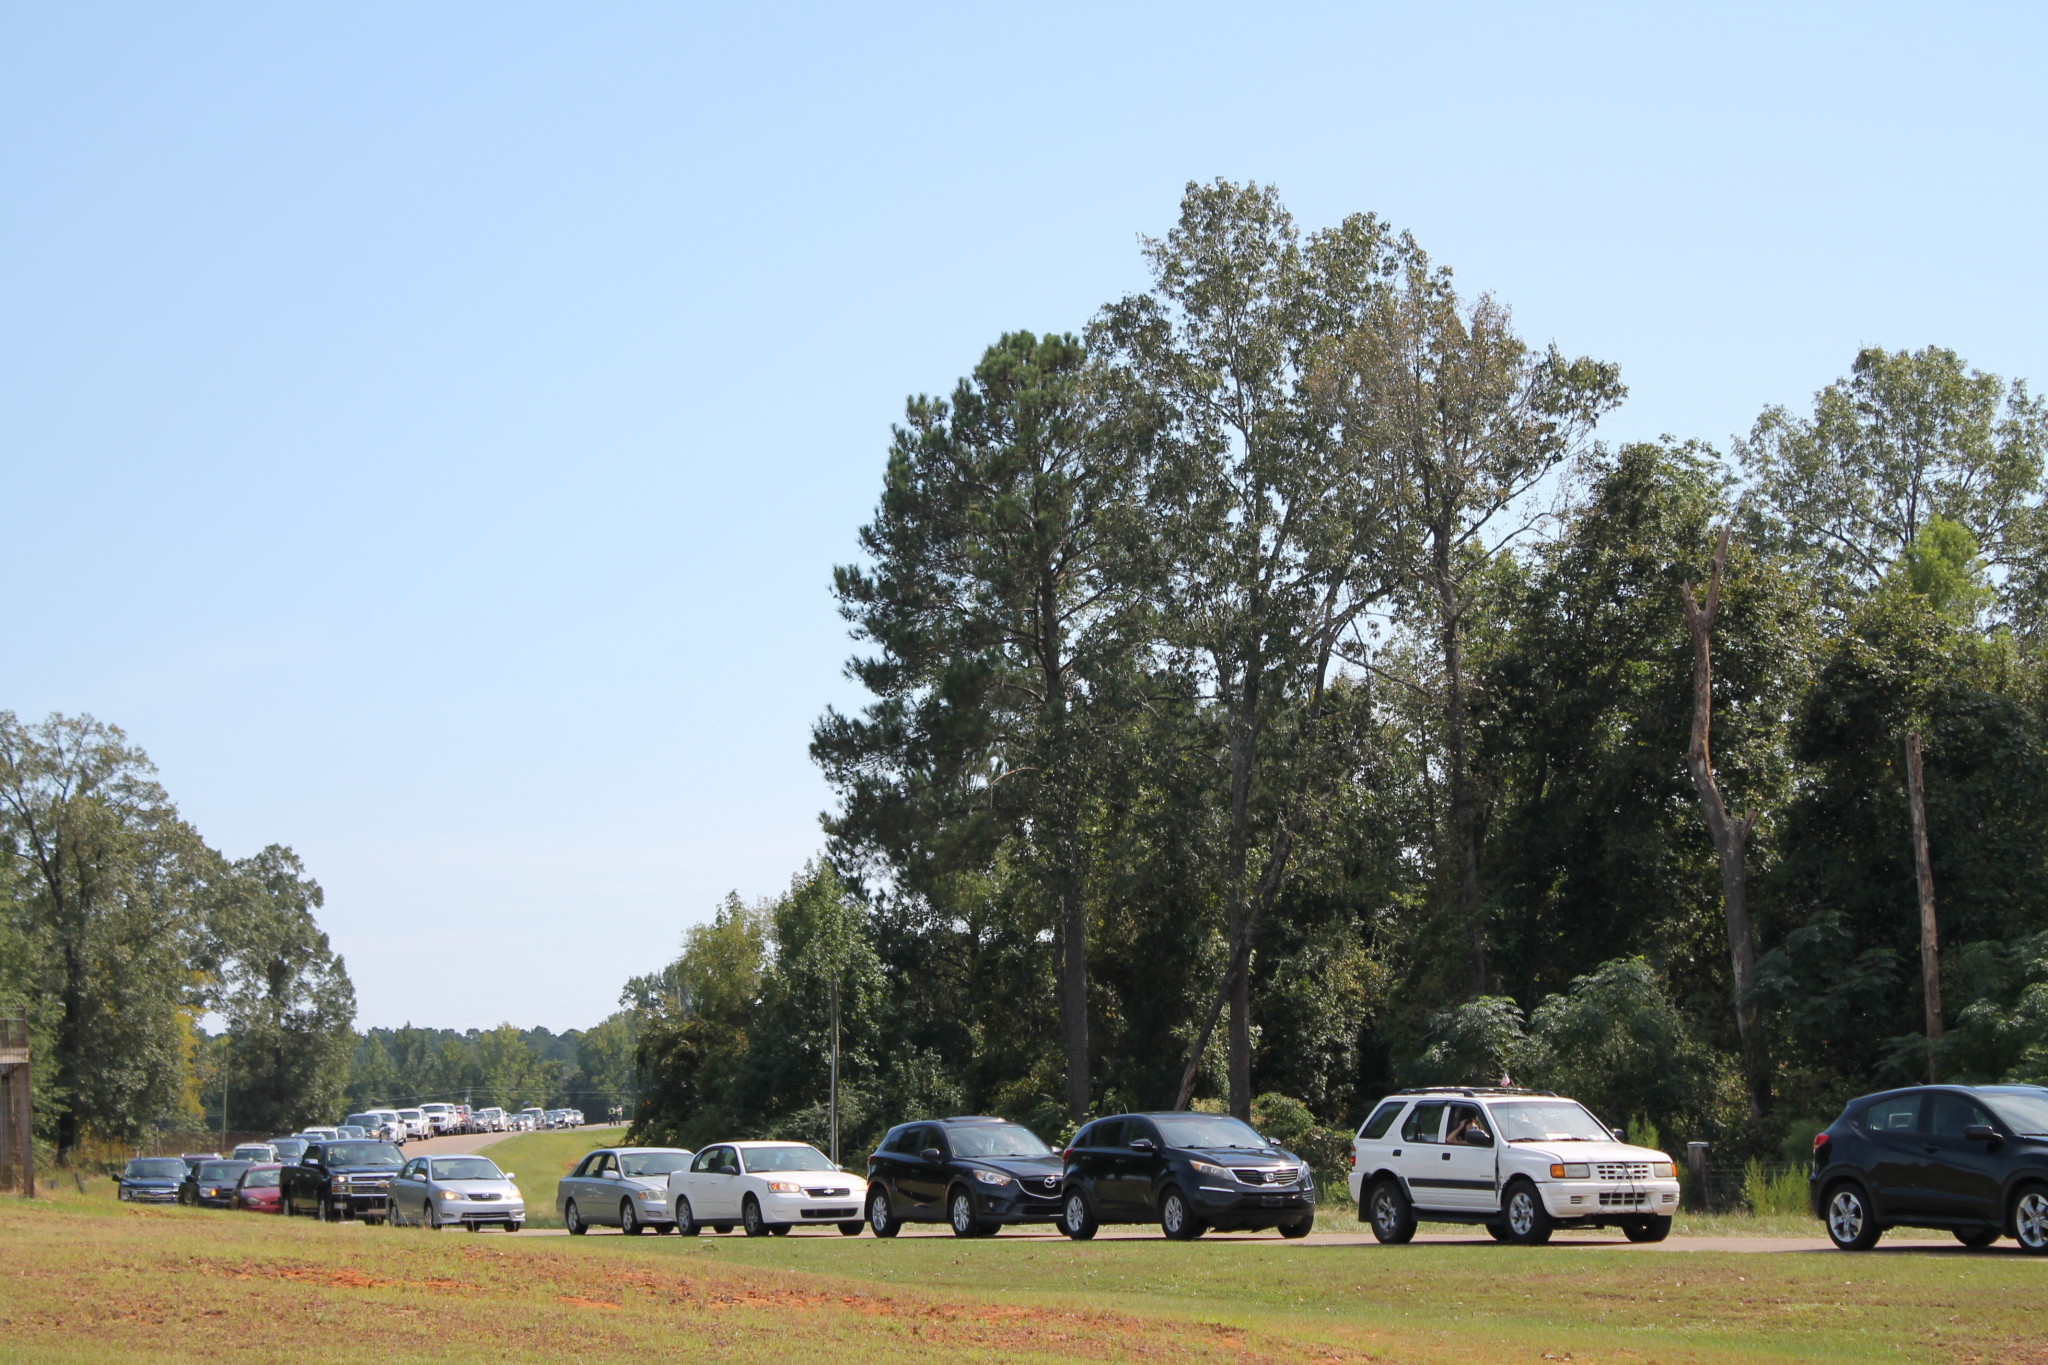 Cars lined up at the Expo Center to reeive food boxes and cases of water handed out by the Louisiana National Guard.